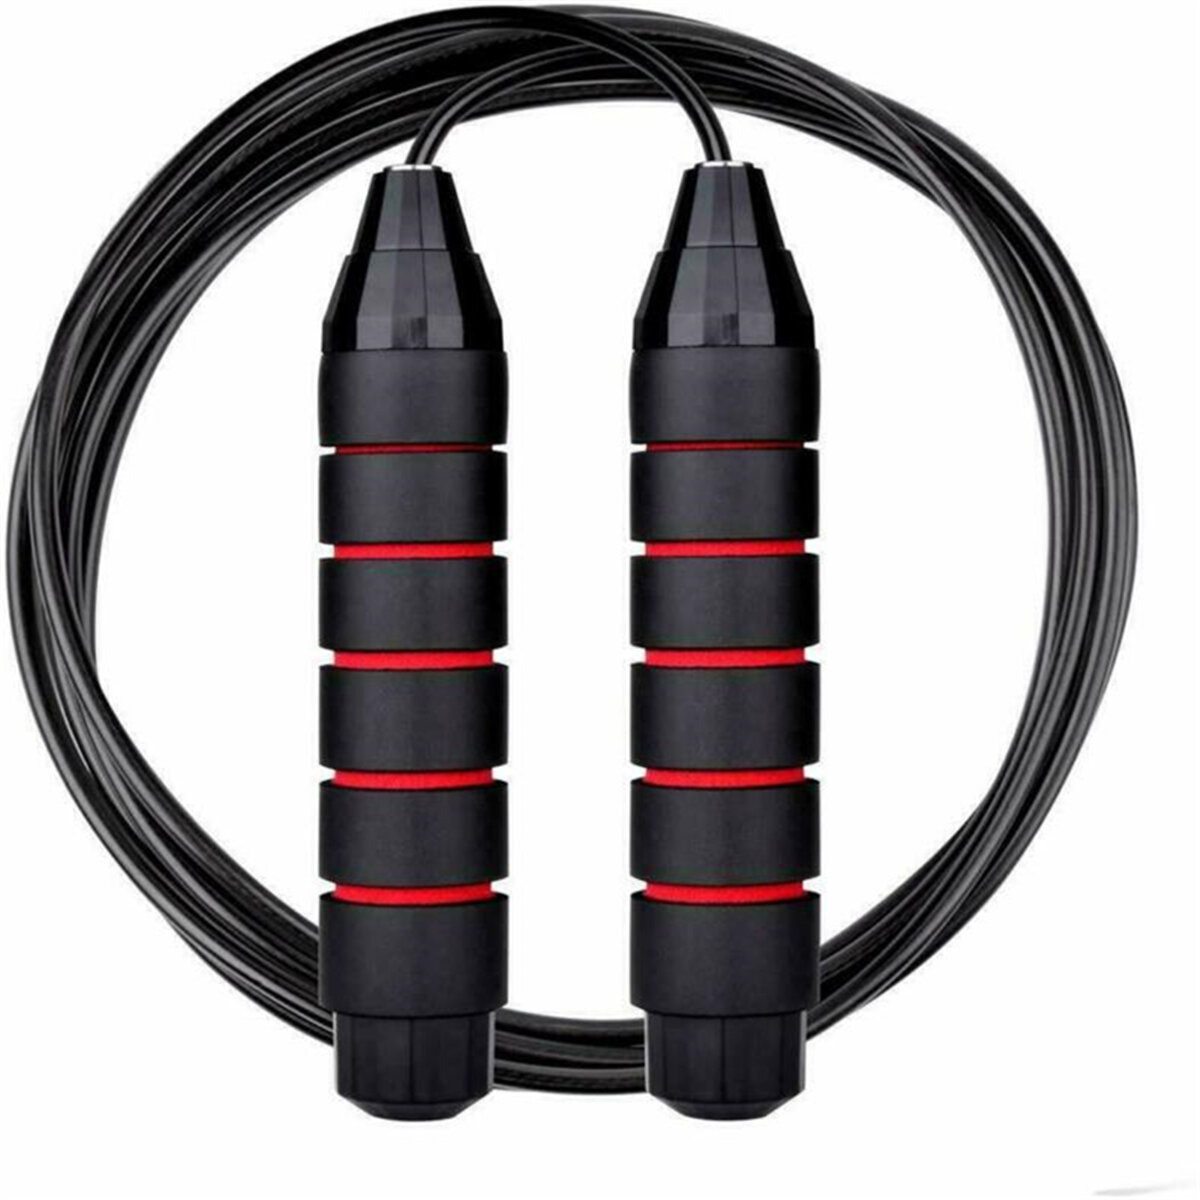 10ft Jump Rope Boxing Weighted Ball Bearing Beaded Rope Jumping Fitness Gym Exercise Tools